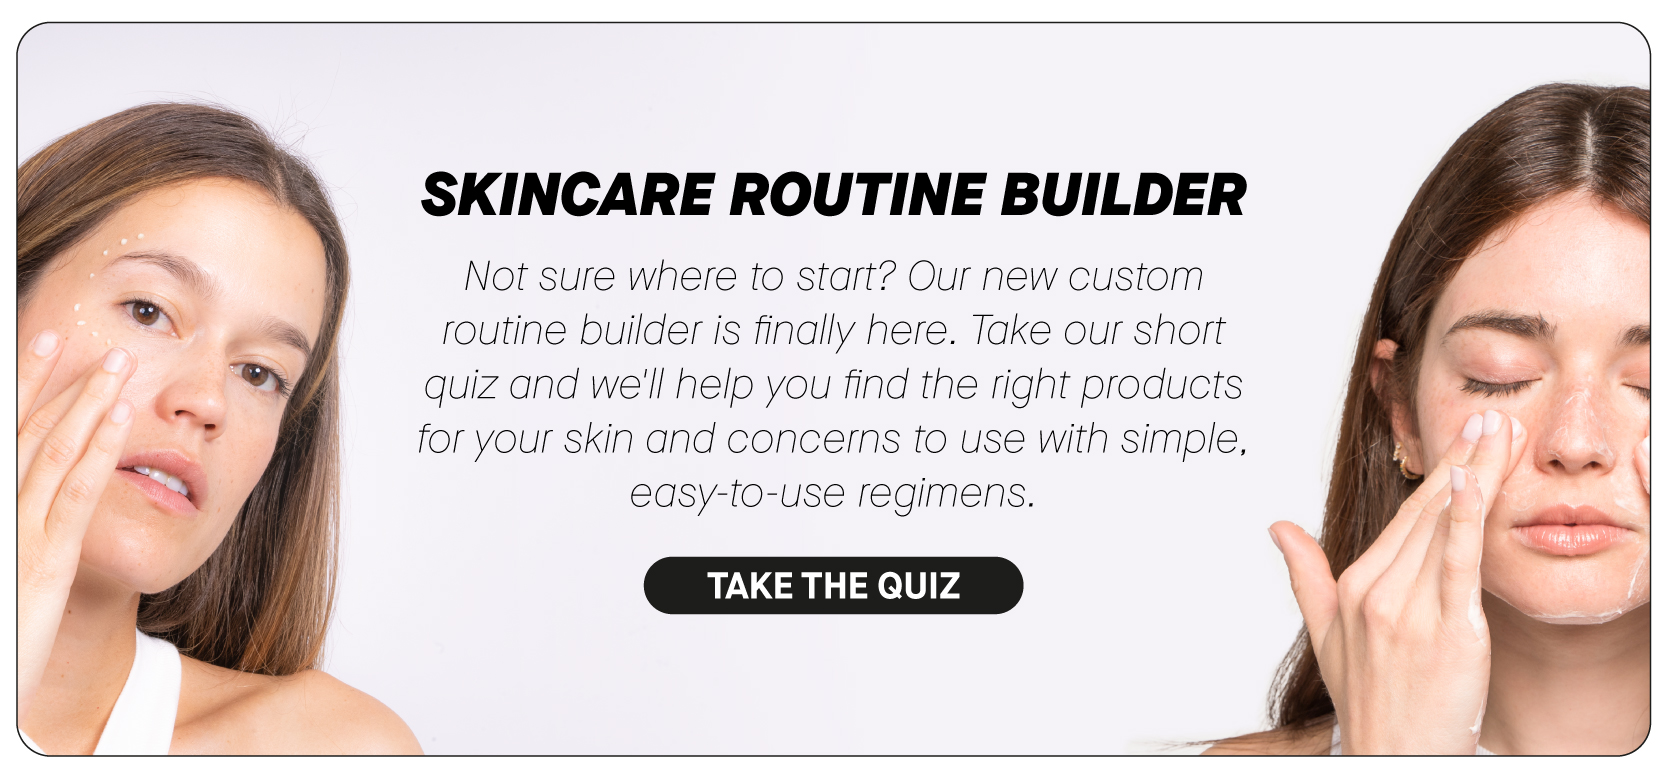  SKINCARE ROUTINE BUILDER Not sure where to start? Our new custom routine builder is finally here. Take our short quiz and we'll help you find the right products for your skin and concerns to use with simple, easy-to-use regimens. TAKE THE QUIZ 